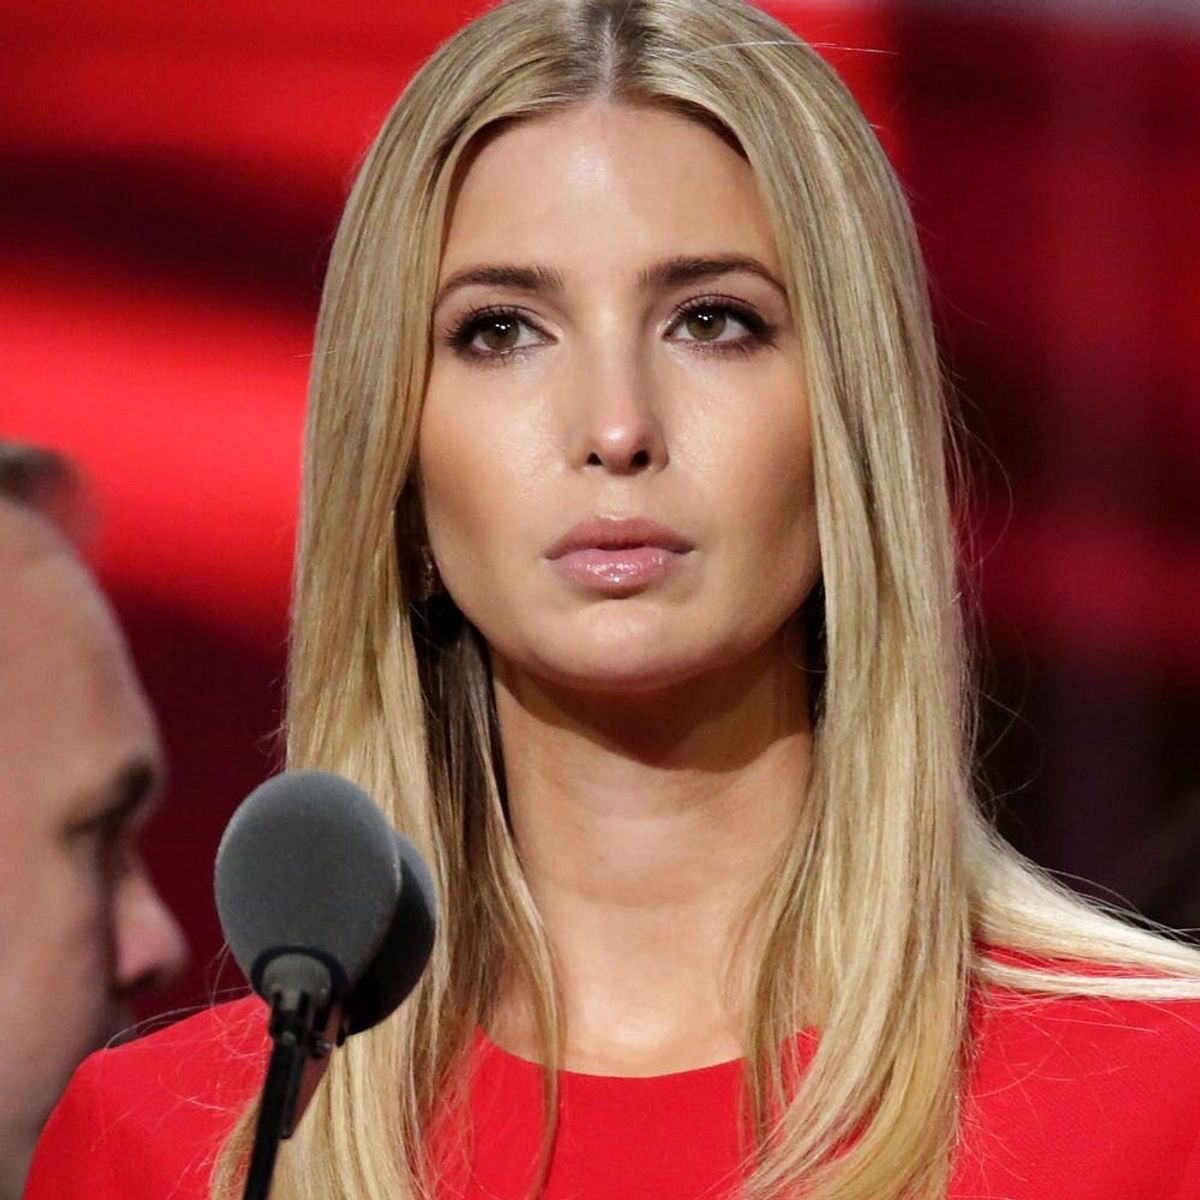 Nordstrom’s Got a Pretty Valid Reason for Ditching Ivanka Trump’s Brand